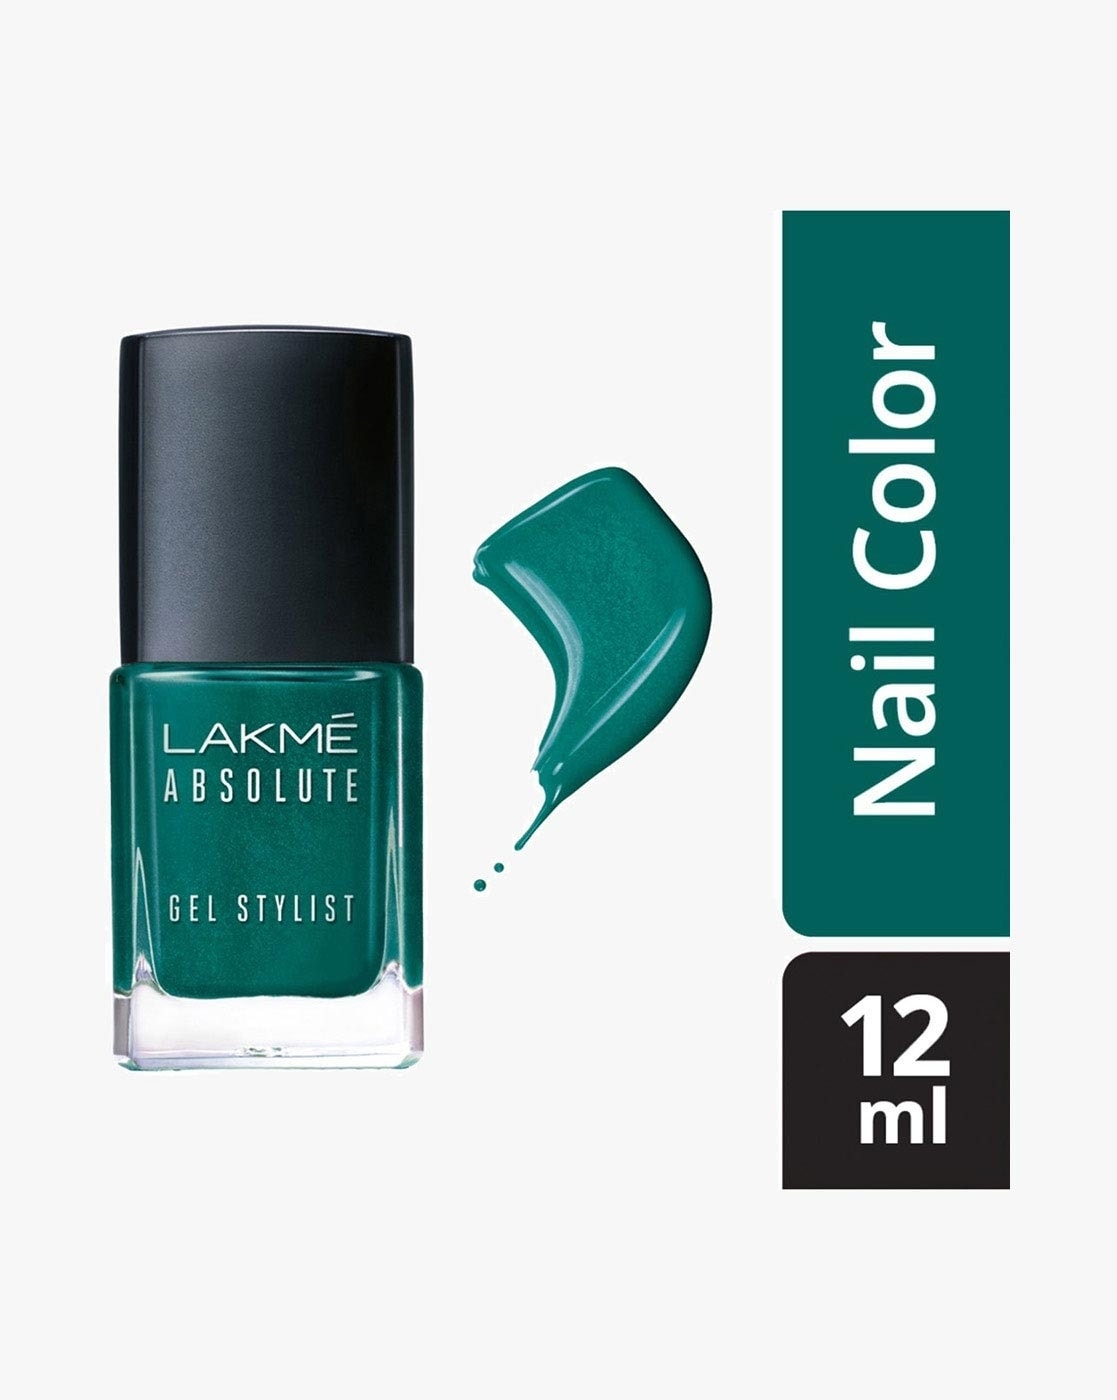 Lakmé Absolute Gel Stylist Nail Color, Ivory Dust, 12 ml Ivory Dust - Price  in India, Buy Lakmé Absolute Gel Stylist Nail Color, Ivory Dust, 12 ml  Ivory Dust Online In India,